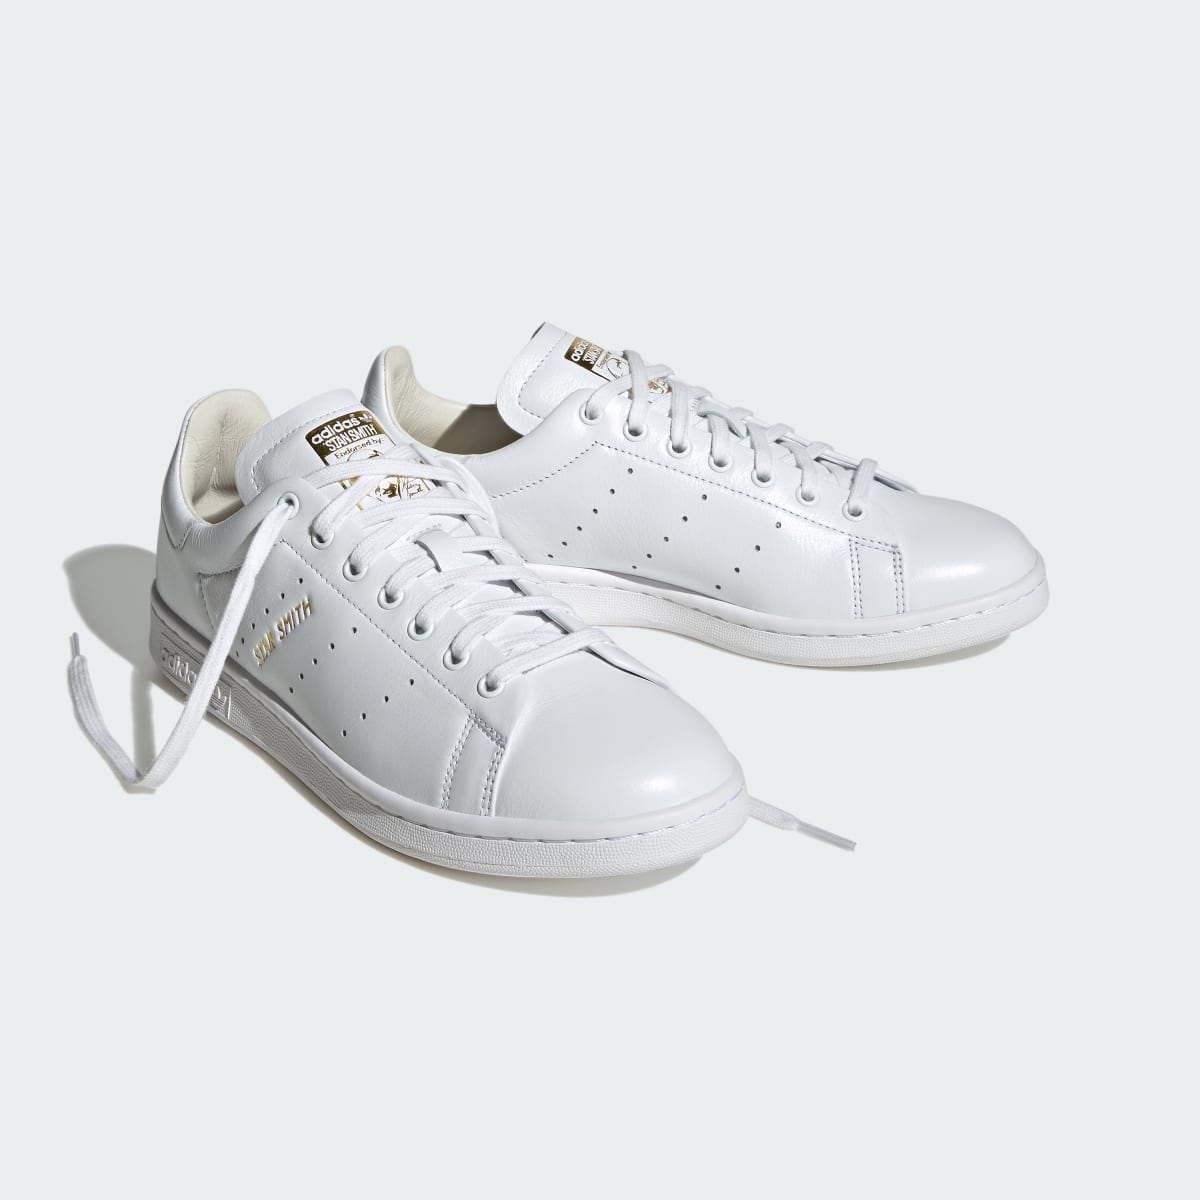 Adidas Chaussure Stan Smith Luxe. 6